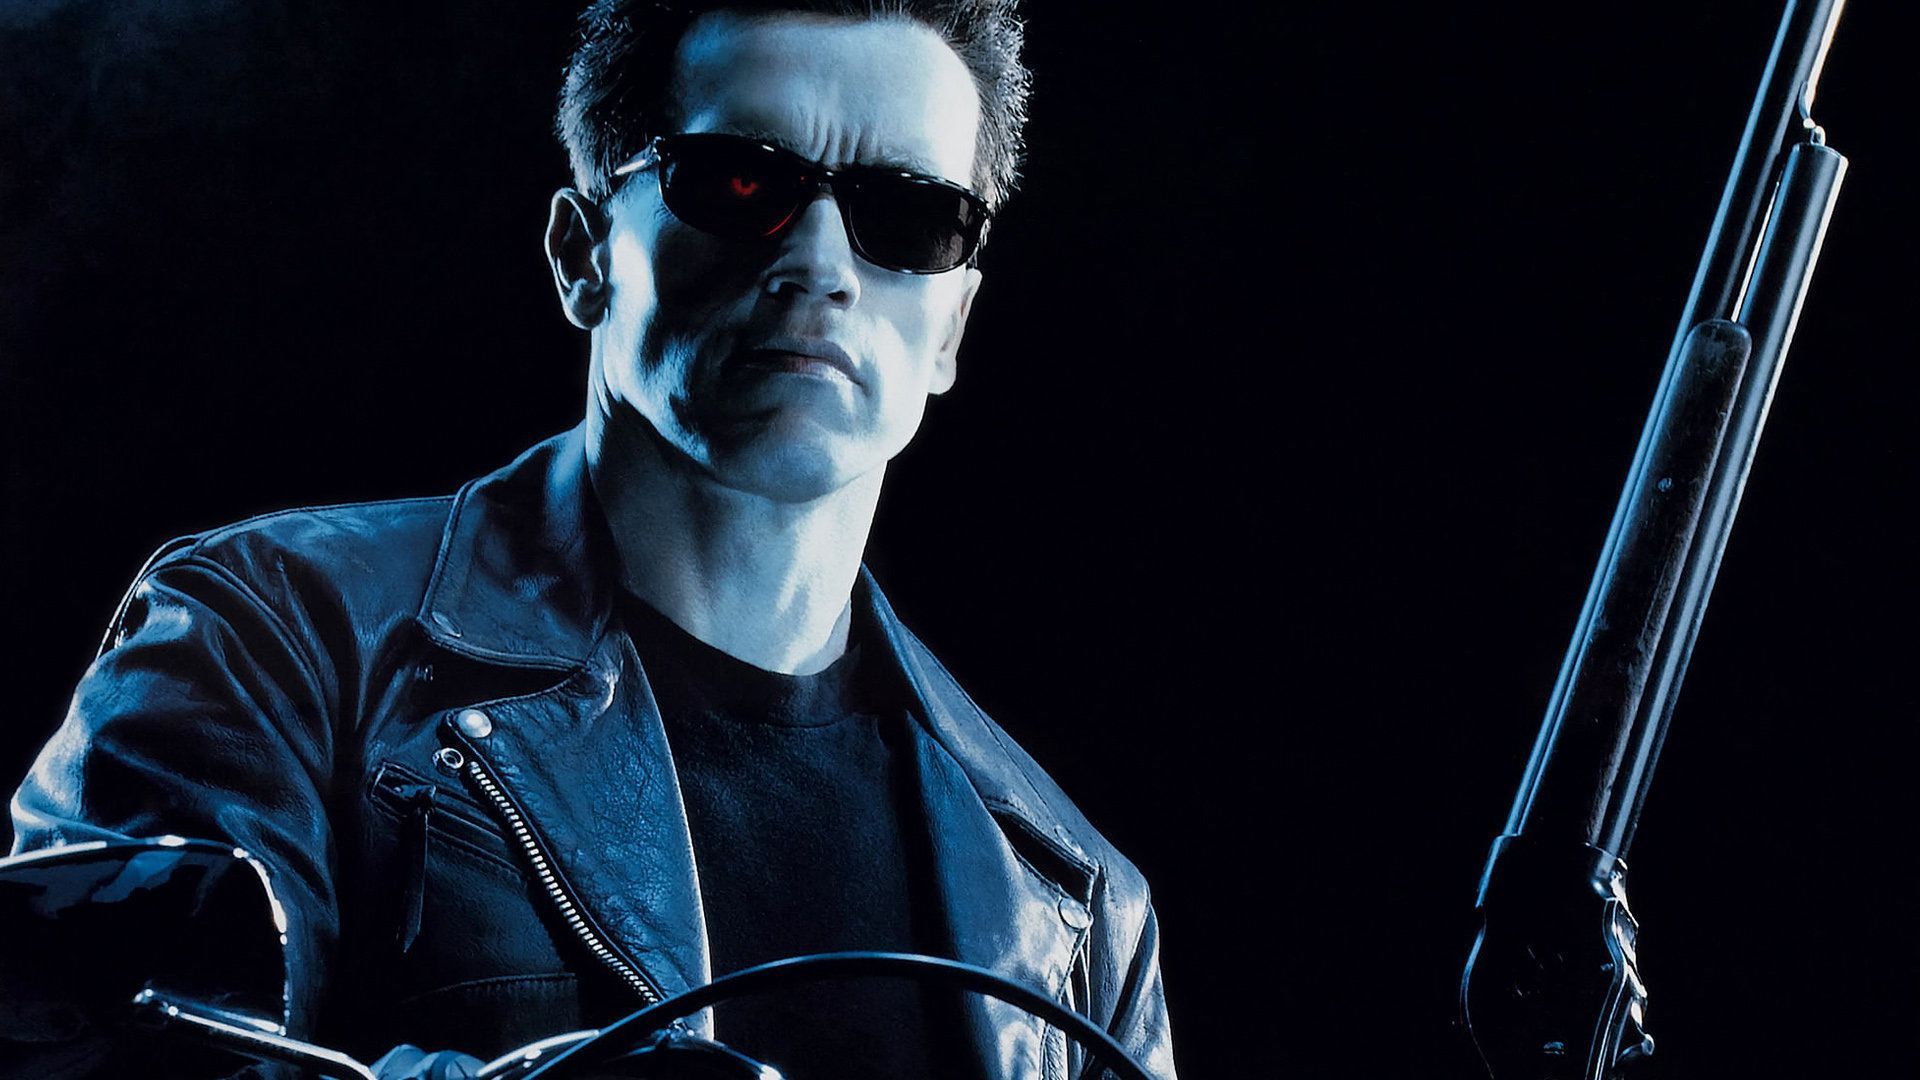 Terminator 2: Judgment Day wallpapers and images - wallpapers ...